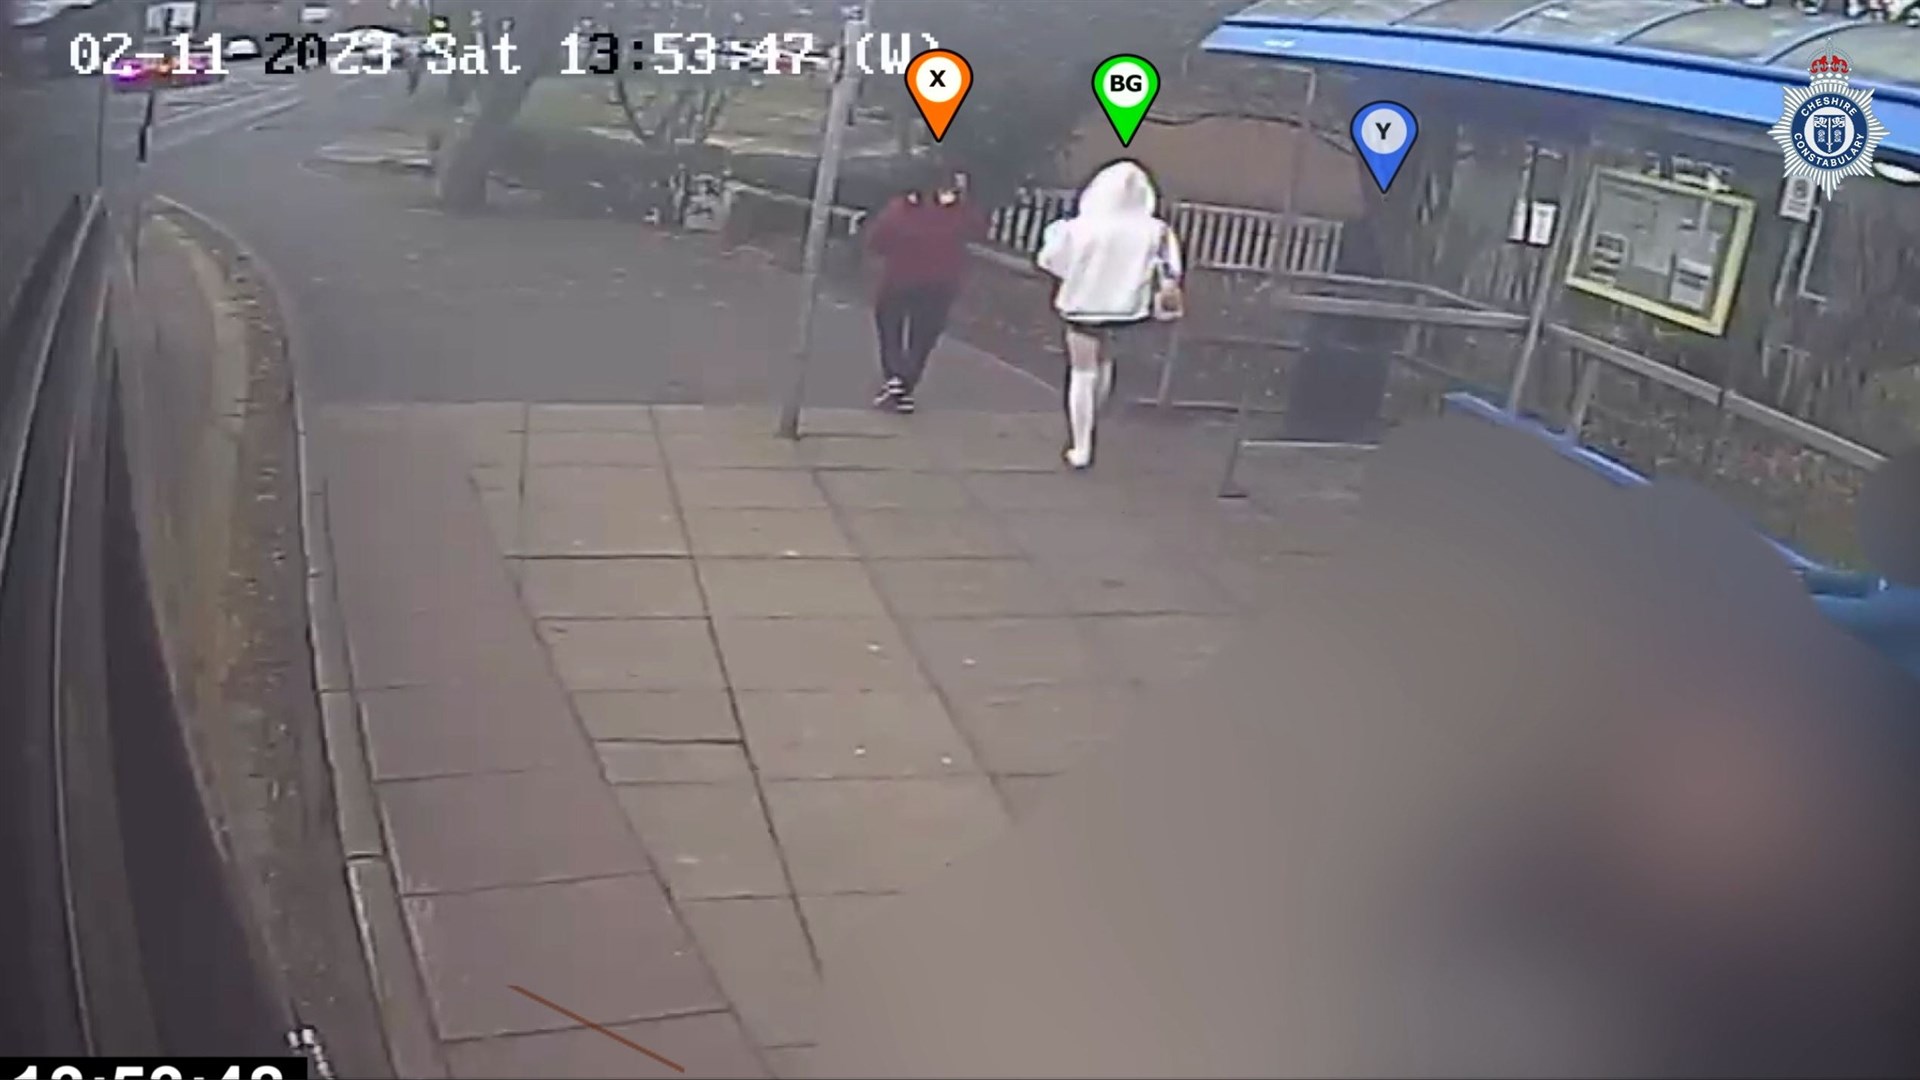 CCTV issued by Cheshire Constabulary of Scarlett Jenkinson (marked X) and Eddie Ratcliffe (marked as Y) meeting Brianna Ghey (marked as BG) at a bus stop on the day of her murder (Cheshire Constabulary/PA)